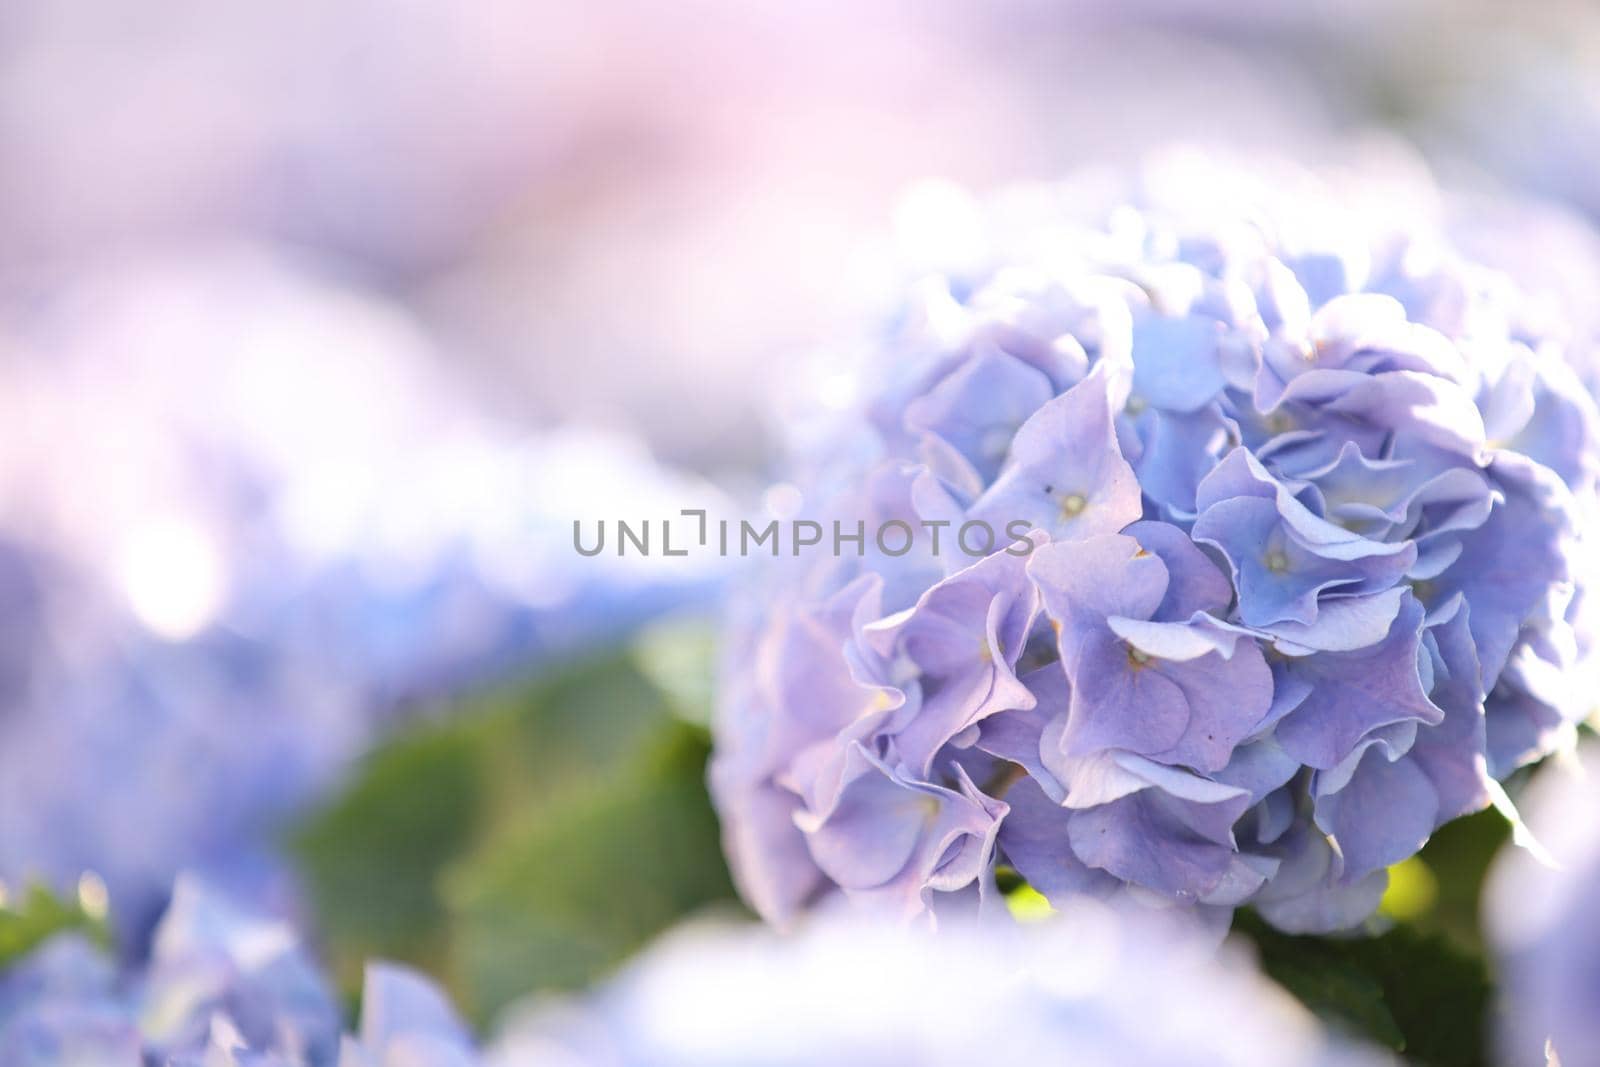 hydrangea flower in close up with pastel blue colors